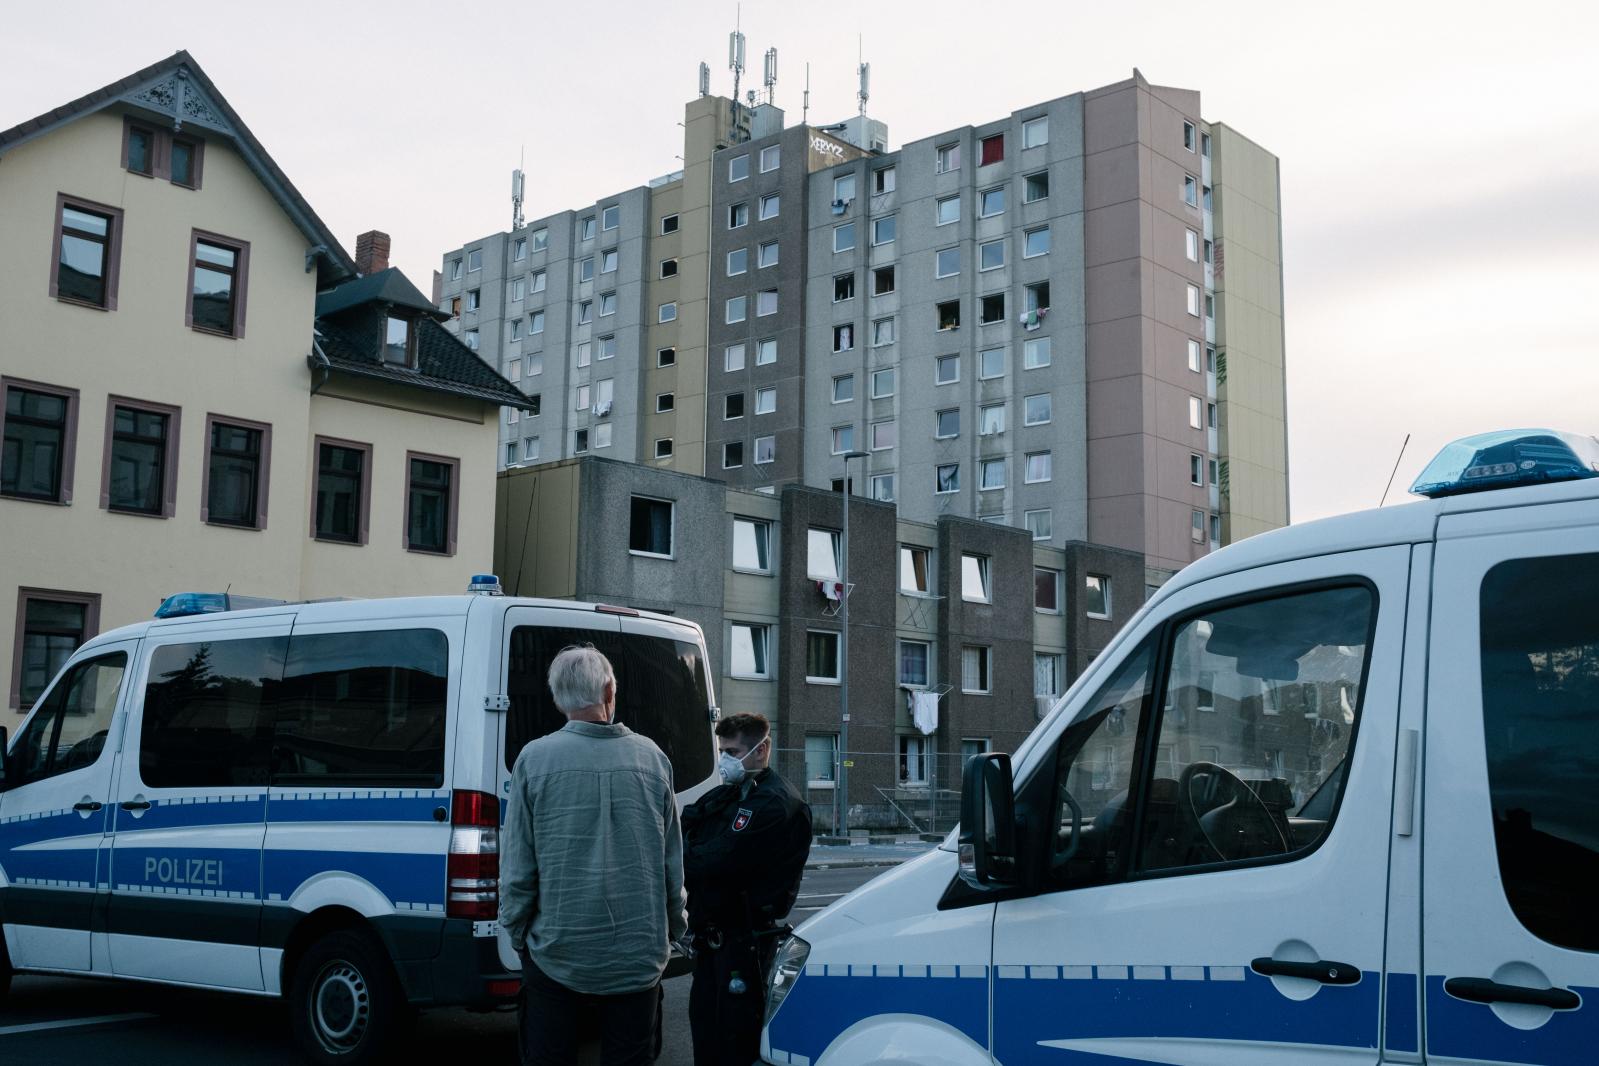 Tower Block Quarantine / "We are also humans" - Policevans block the access to the complex in the...